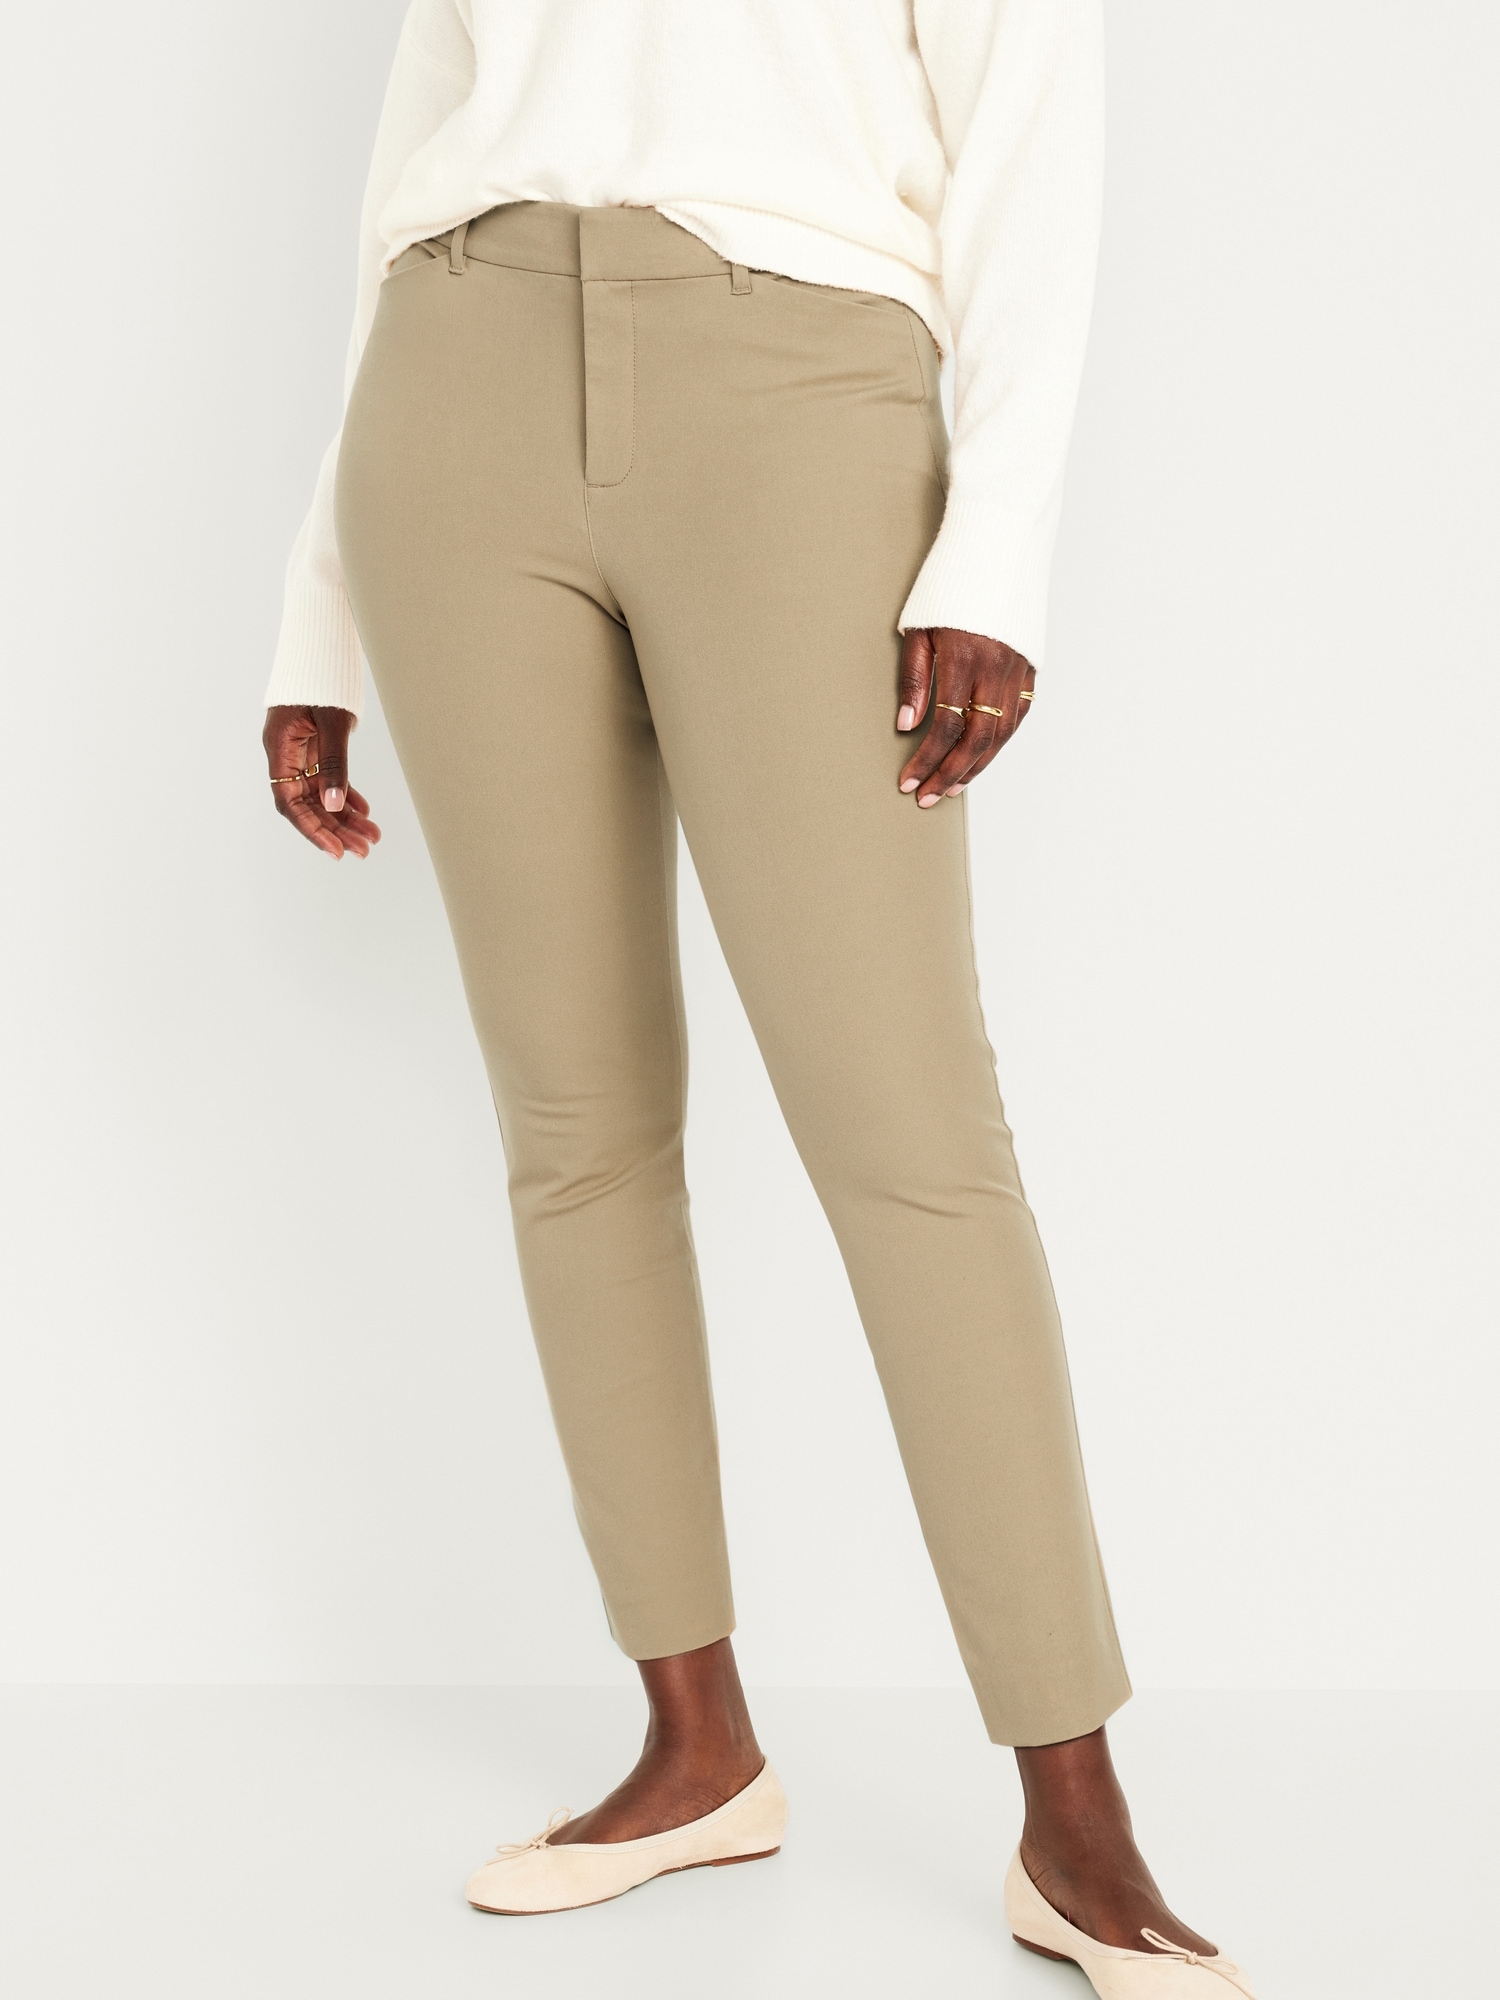 Old Navy High-Waisted Pixie Skinny Ankle Pants